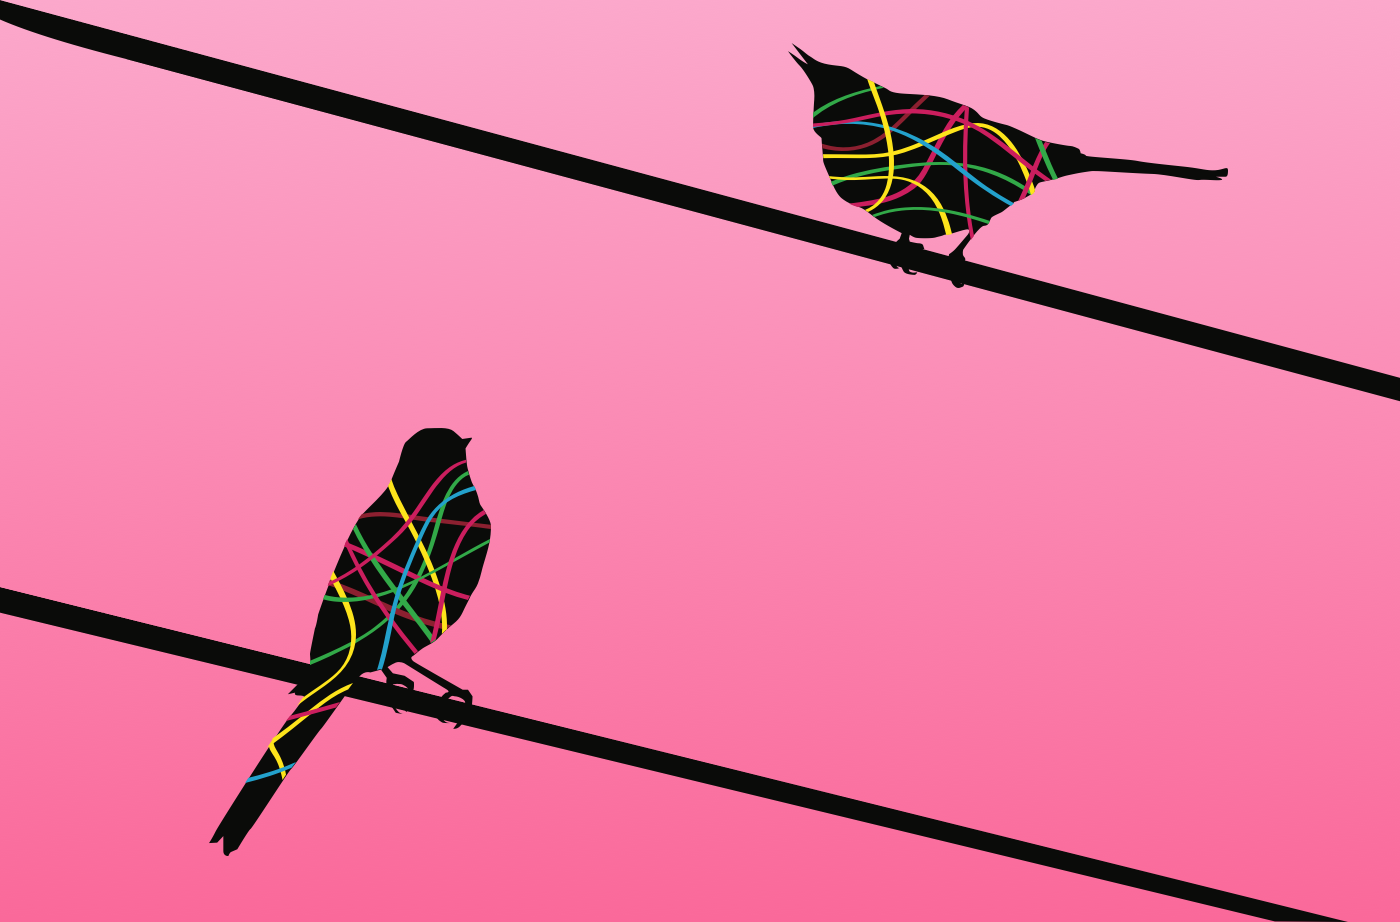 a simple illustration of two birds on two separate wires. one is singing to the other. the bodies are abstract and have intersecting wires in them